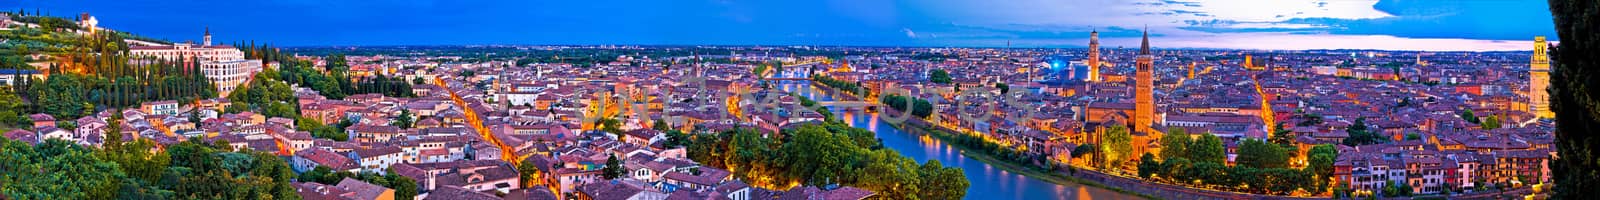 Verona old city and Adige river panoramic aerial view at evening by xbrchx